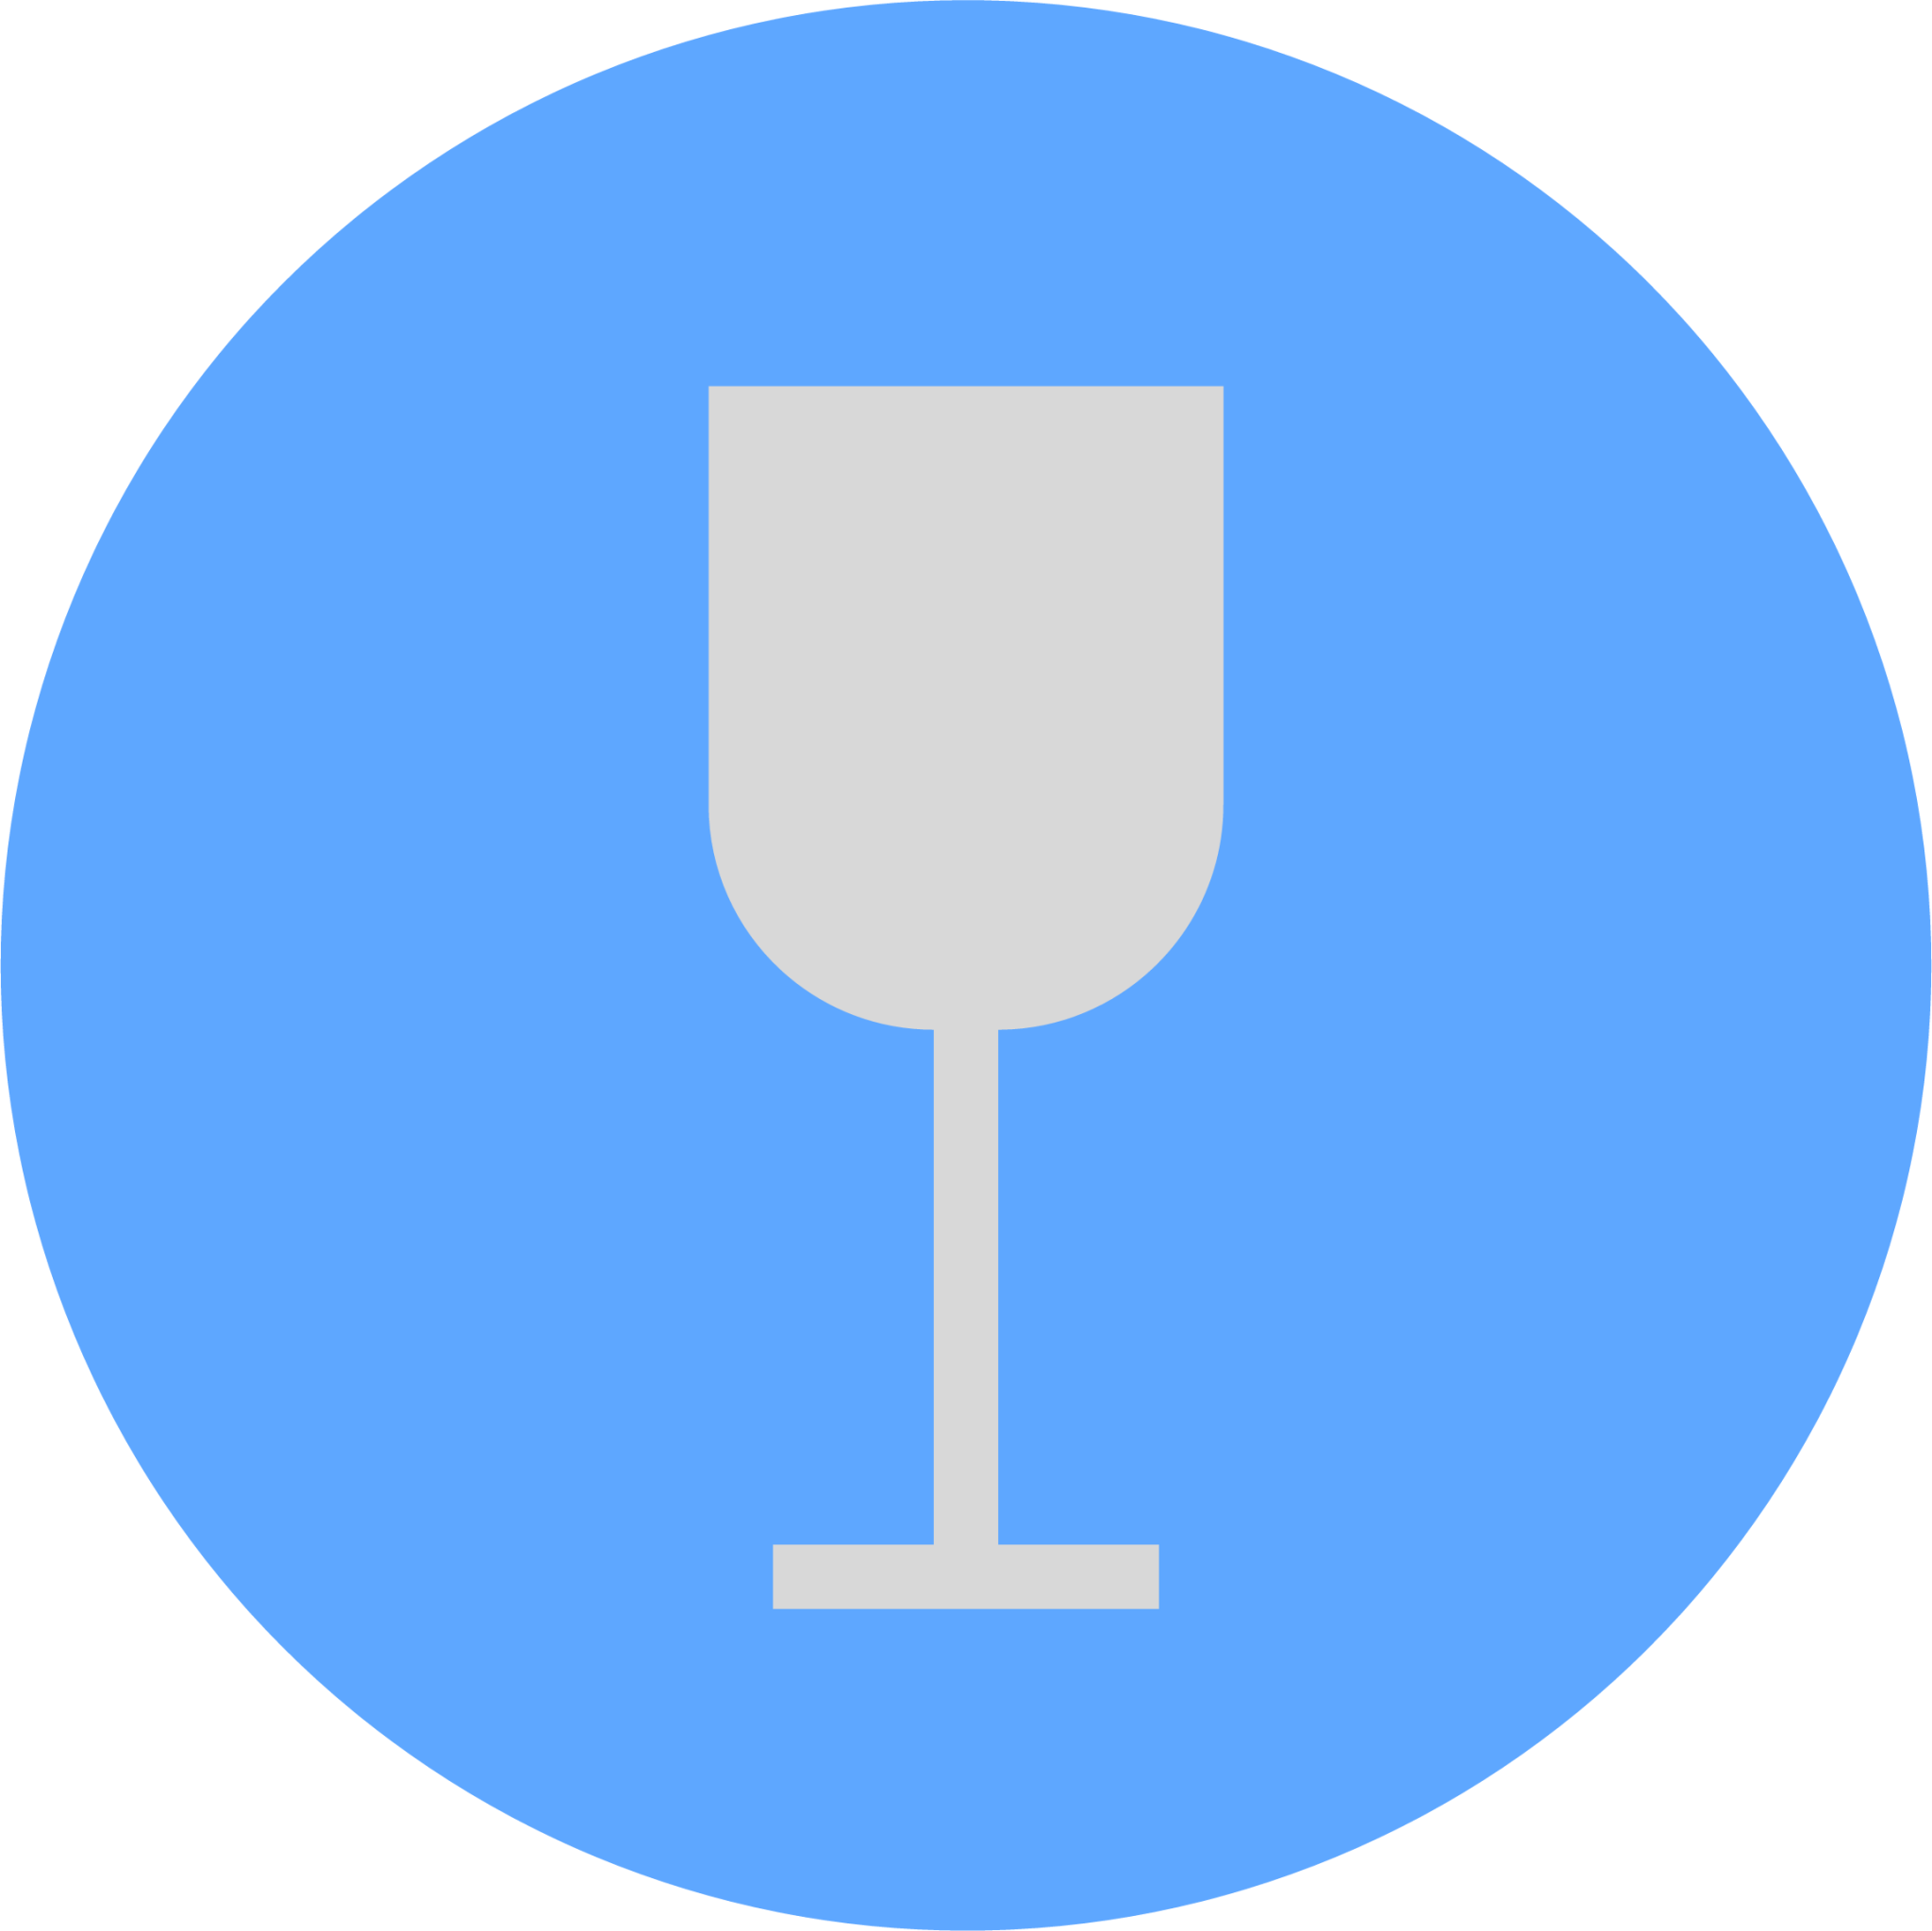 blue plate wine glass icon